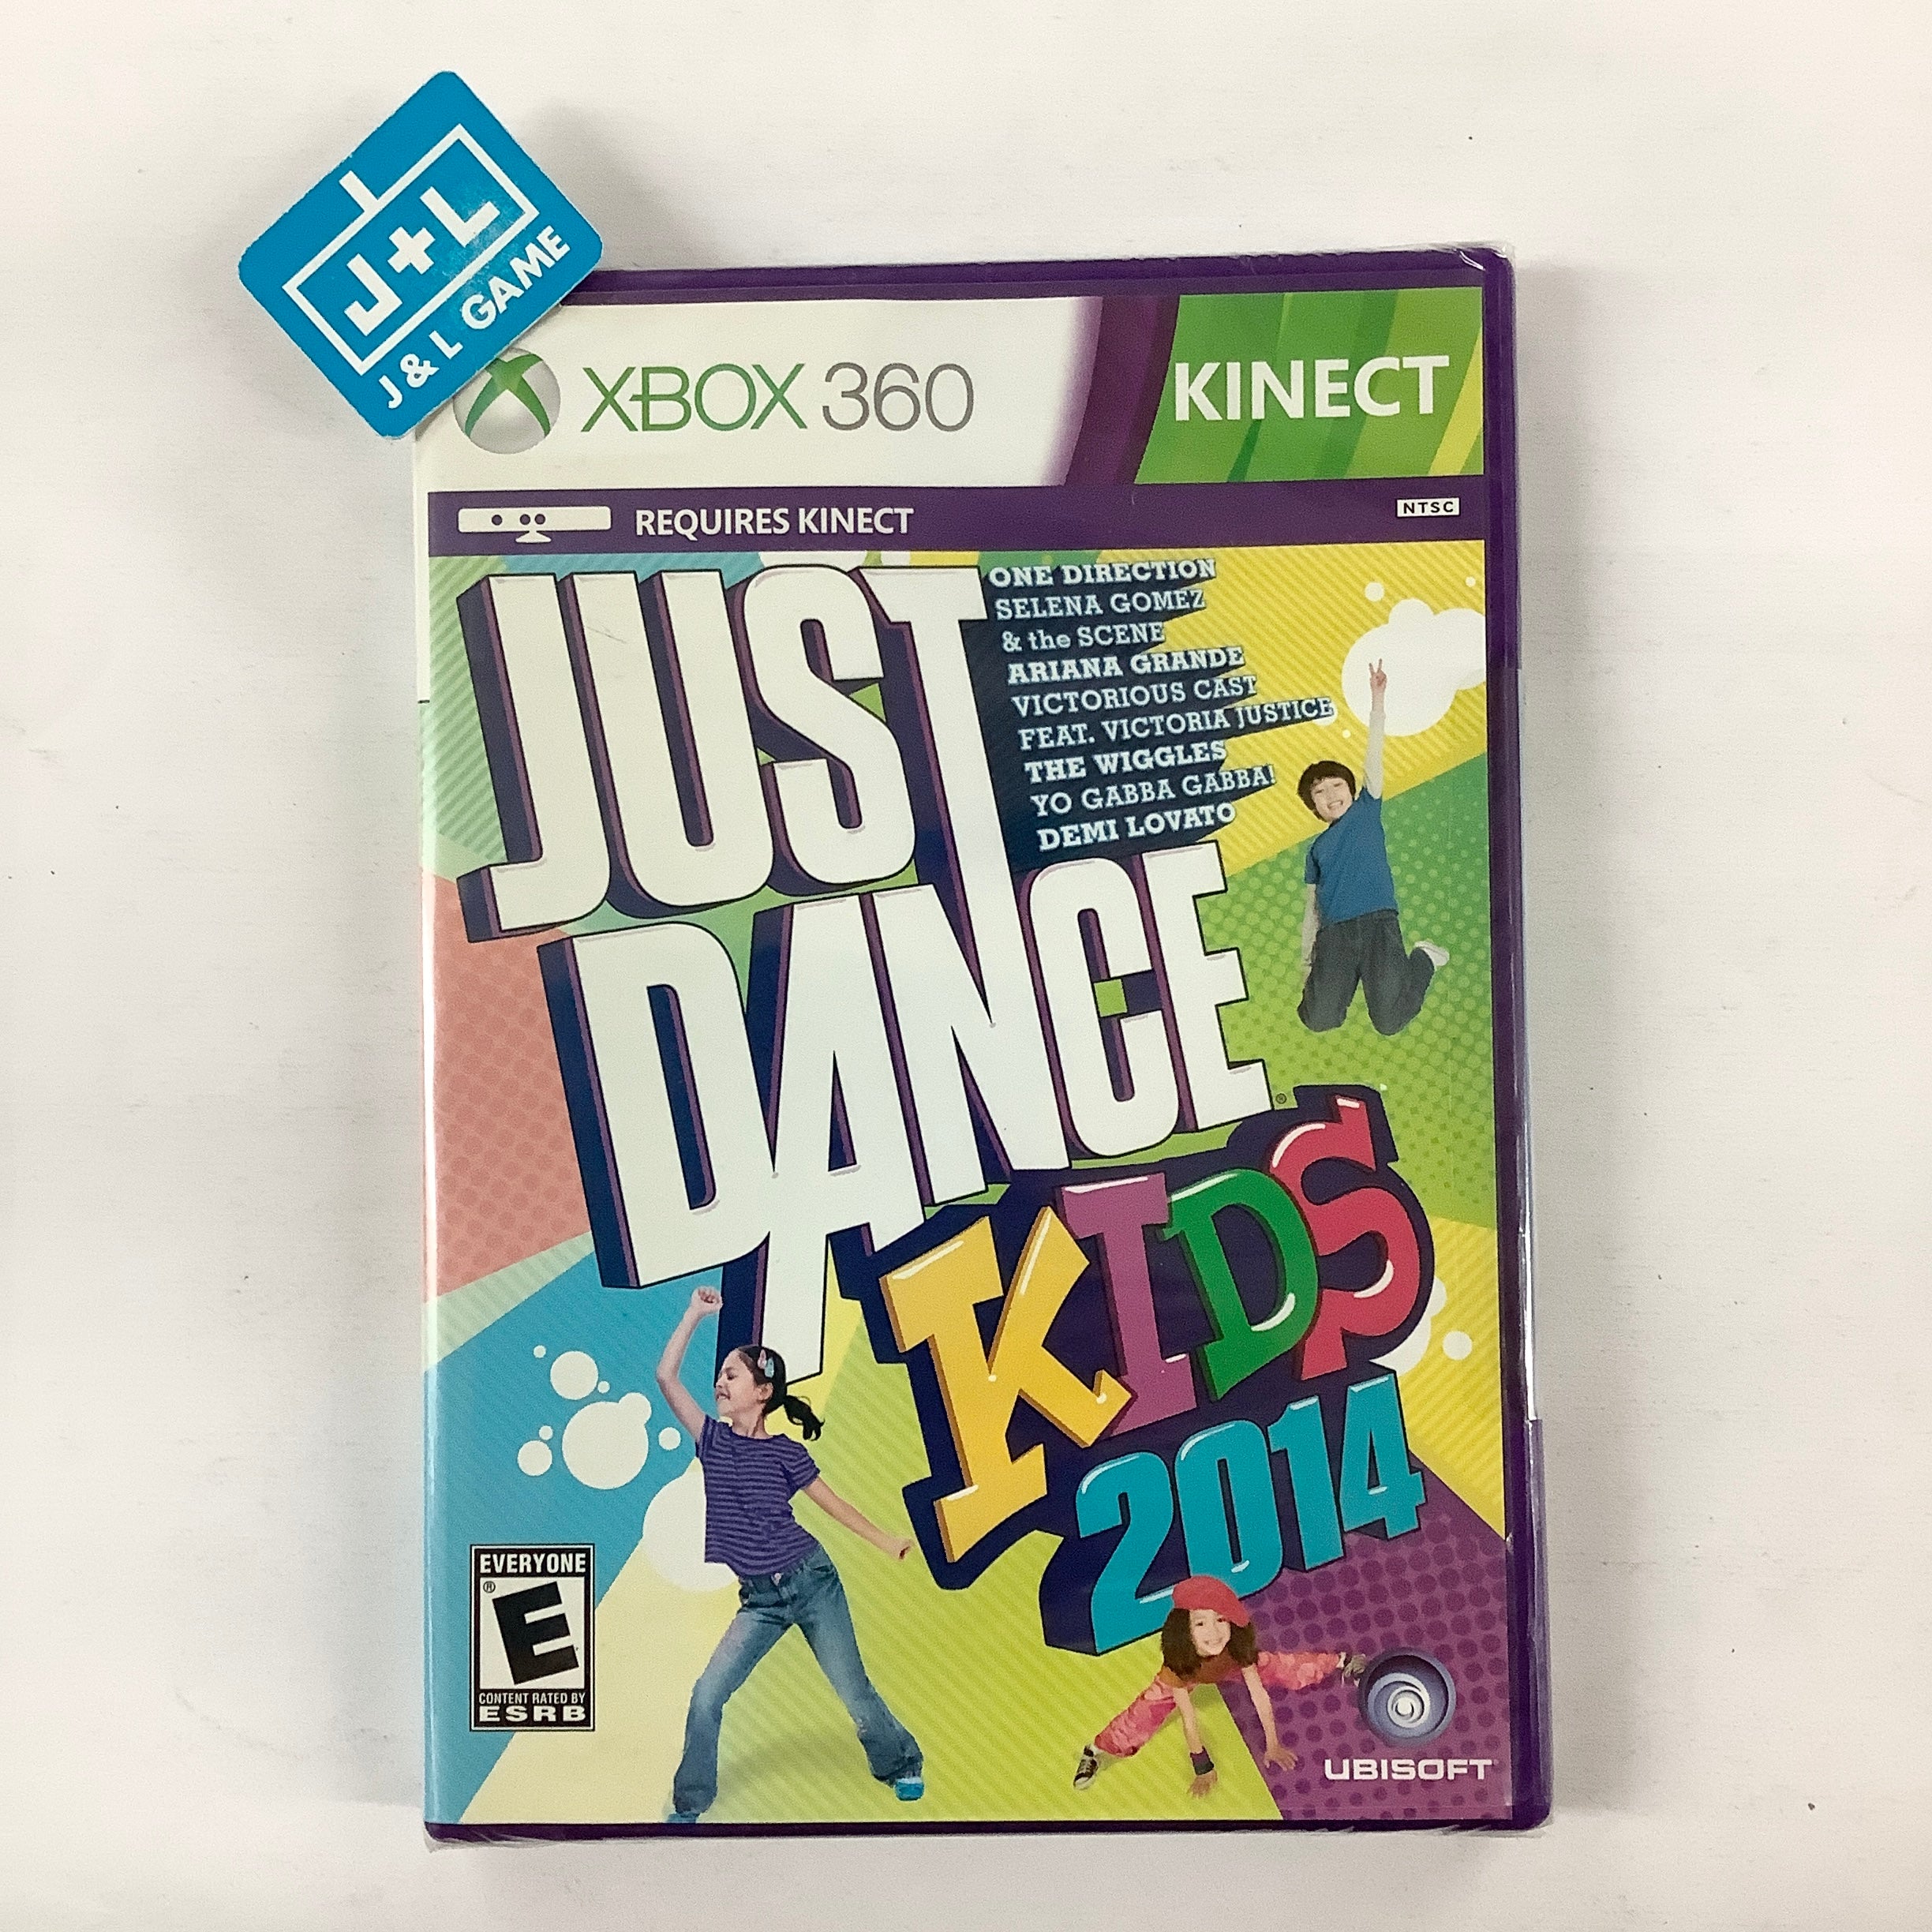 Just Dance Kids 2014 (Kinect Required) - Xbox 360 Video Games Ubisoft   